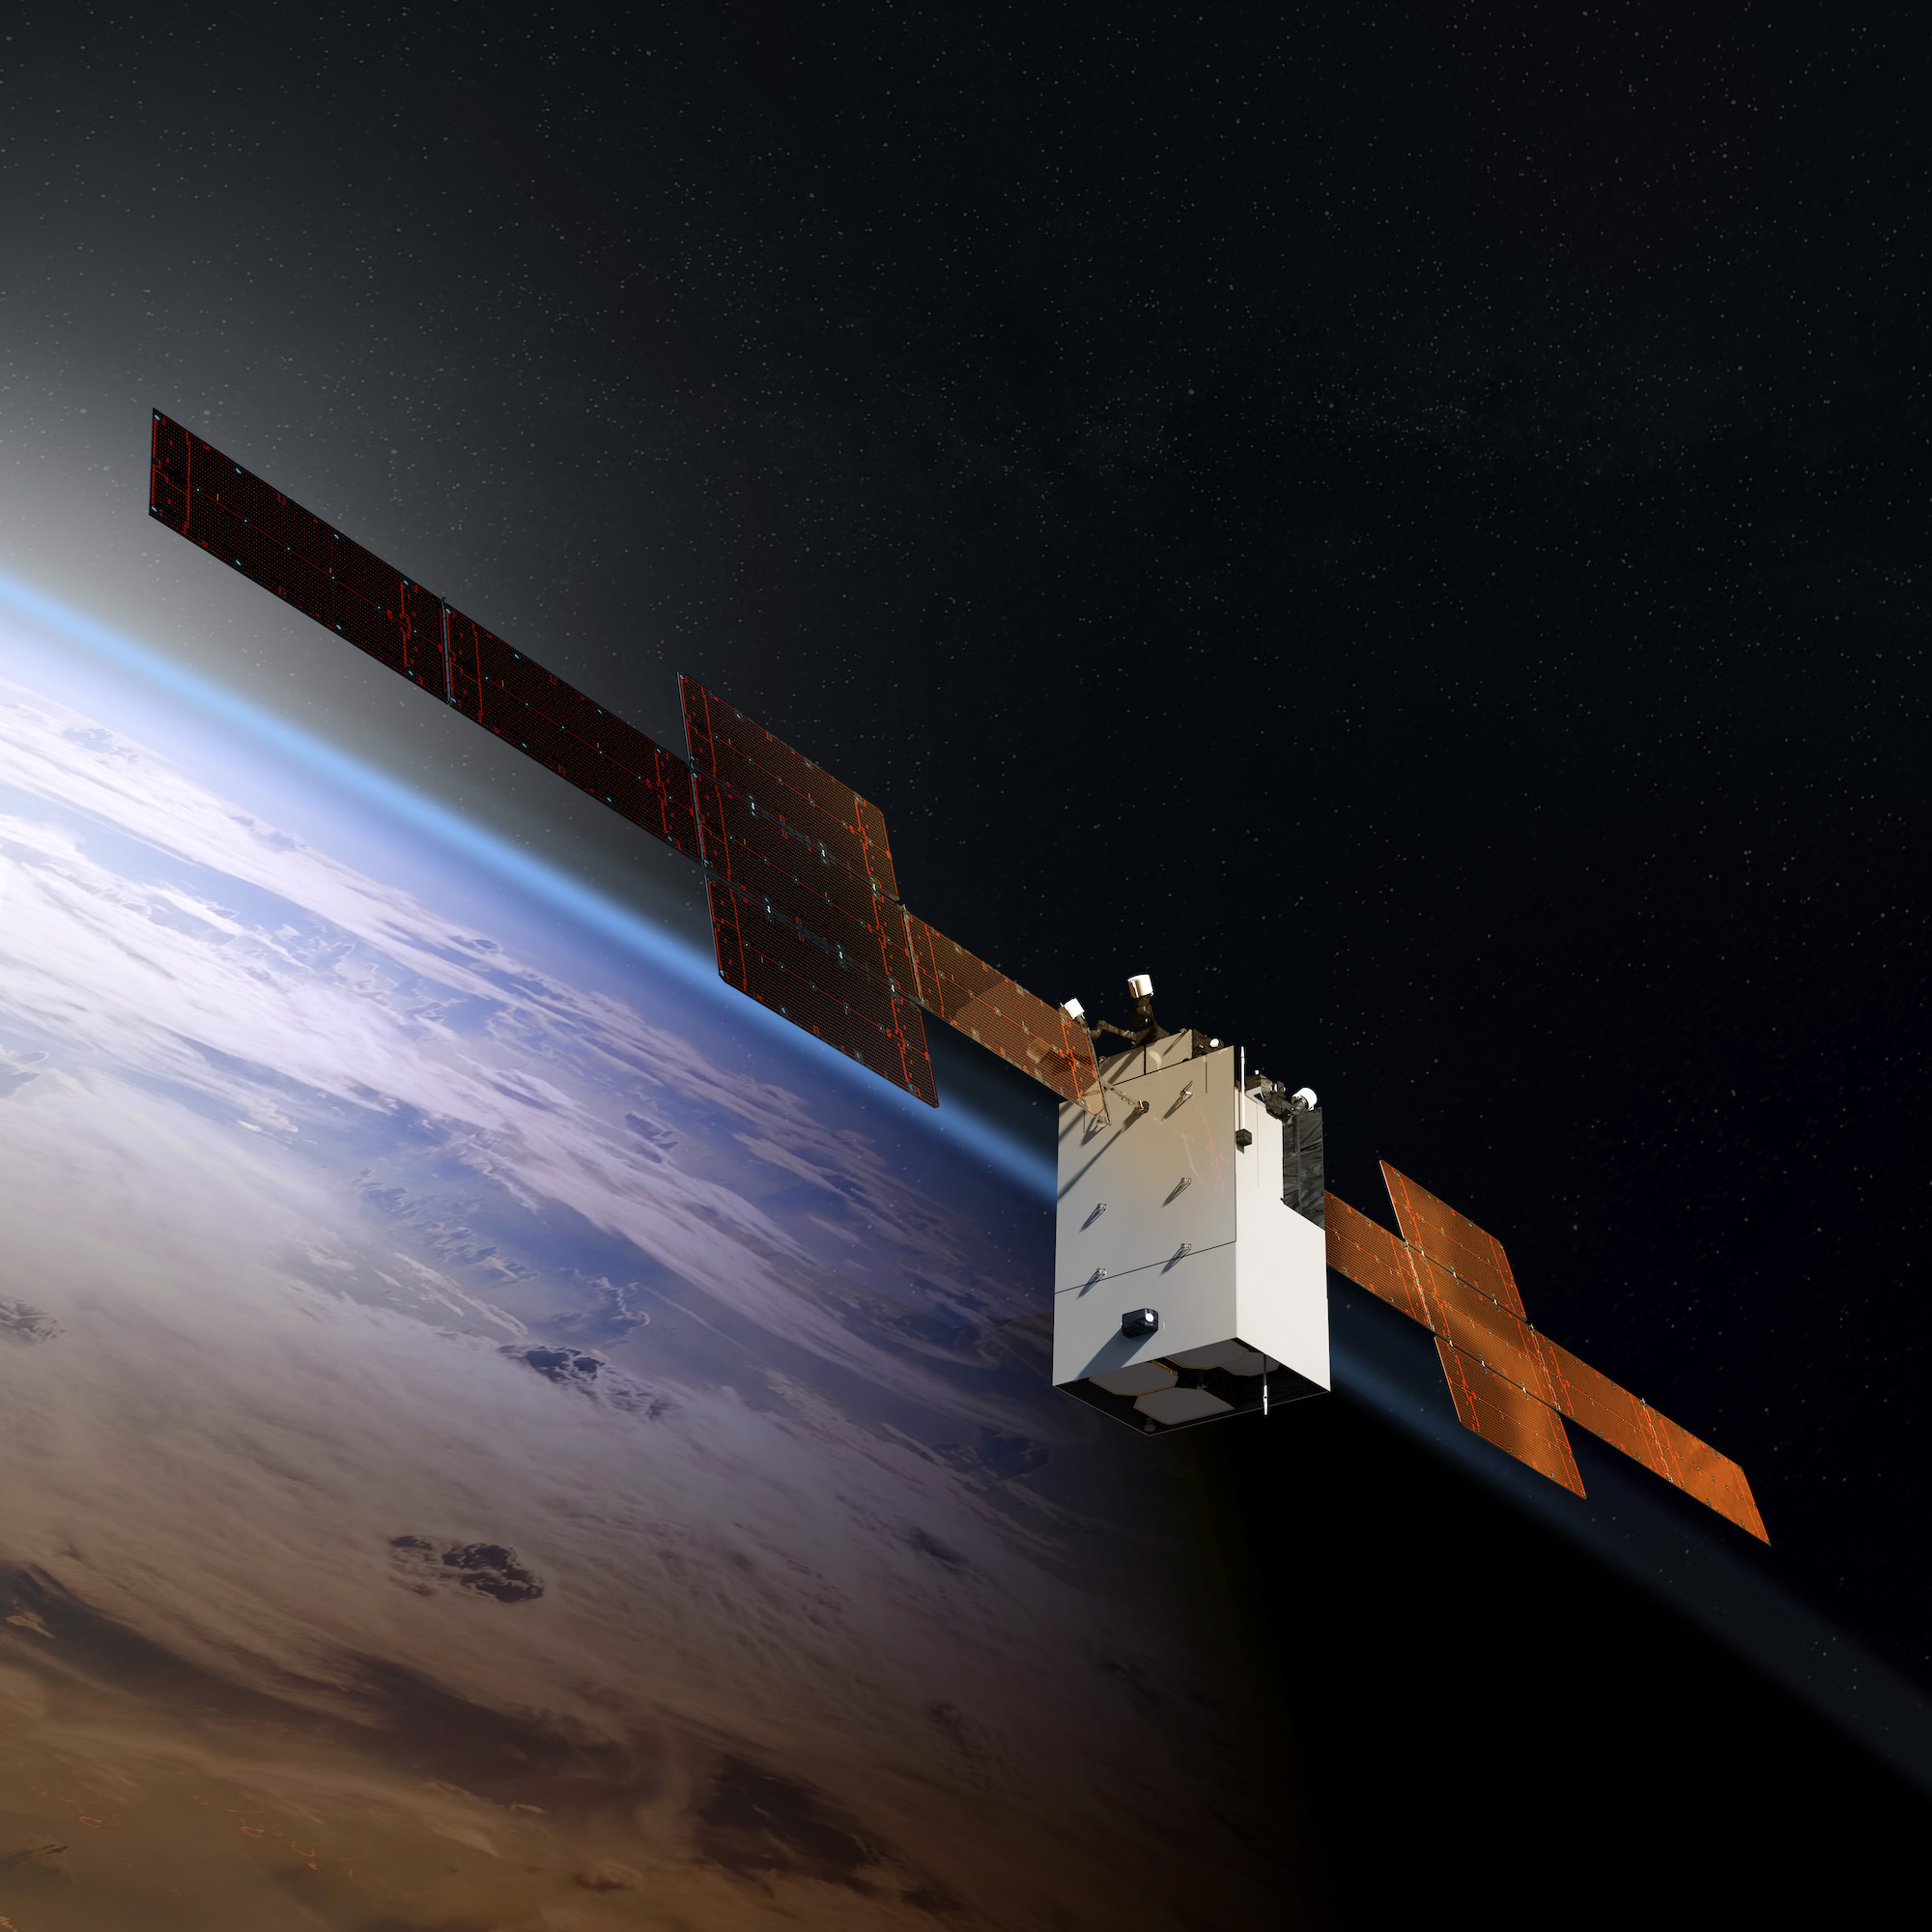 As directed by Congress, Room Pressure to procure wideband communications satellite